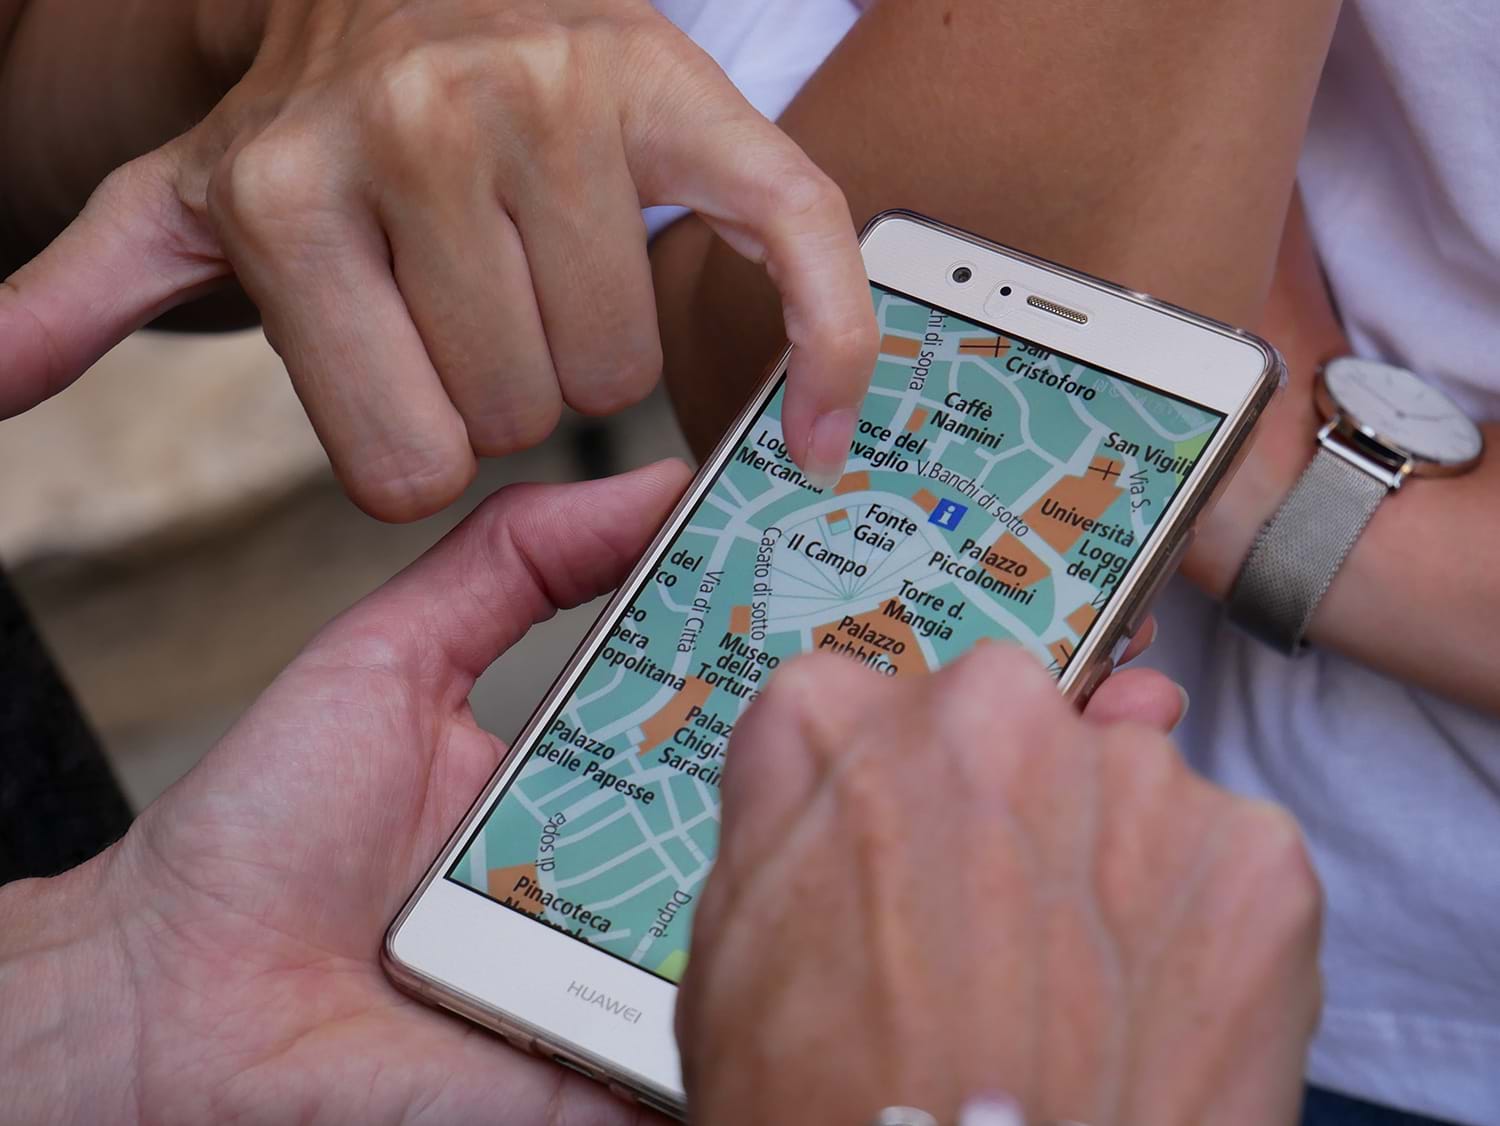 People looking at a map on a phone